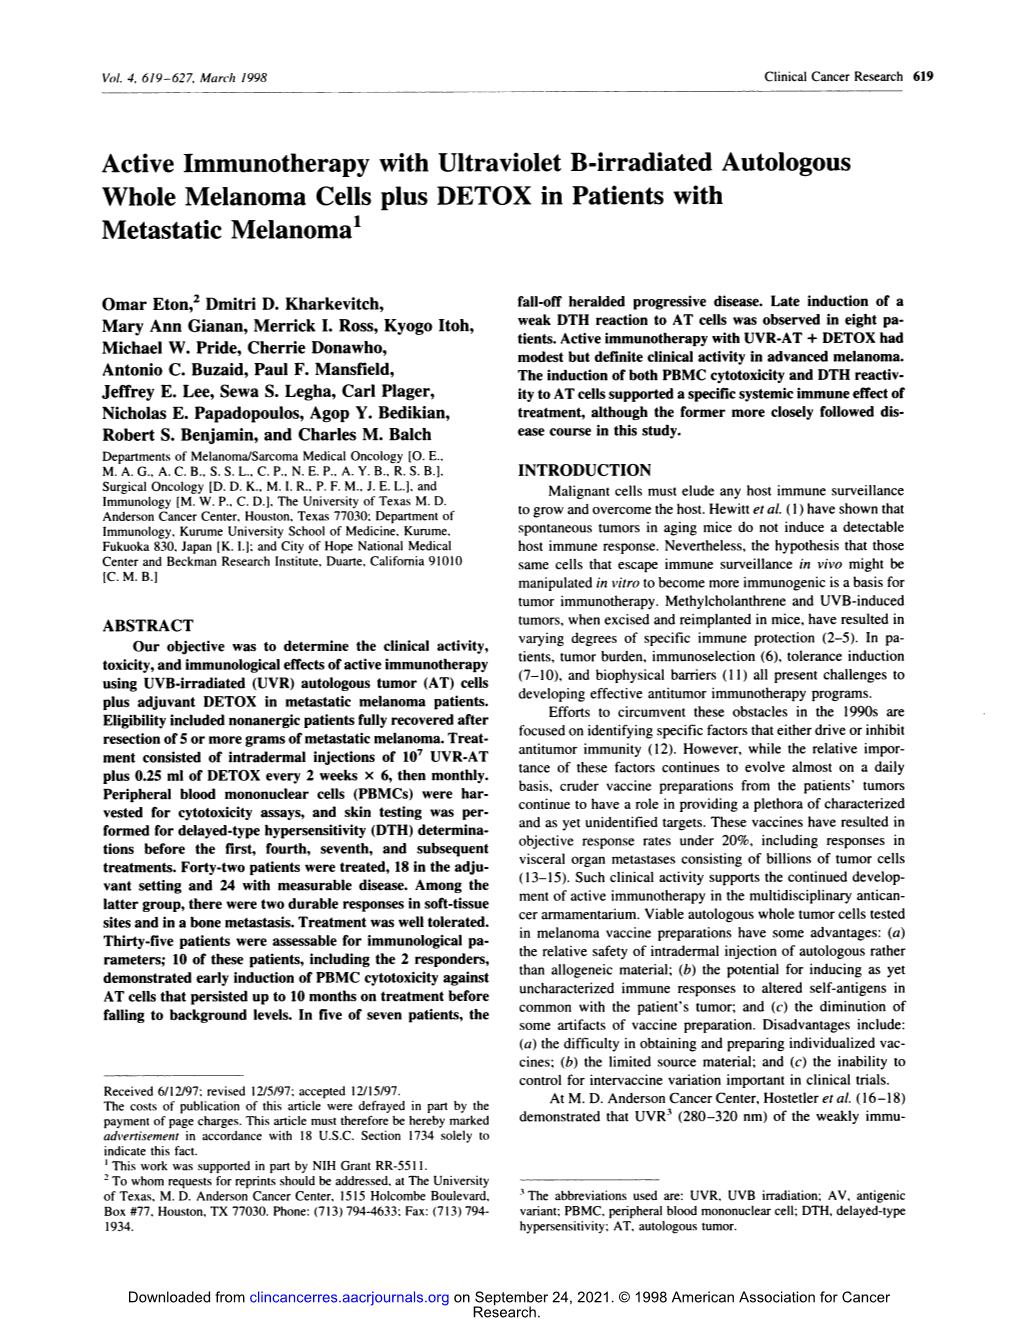 Active Immunotherapy with Ultraviolet B-Irradiated Autologous Whole Melanoma Cells Plus DETOX in Patients with Metastatic Melanoma1